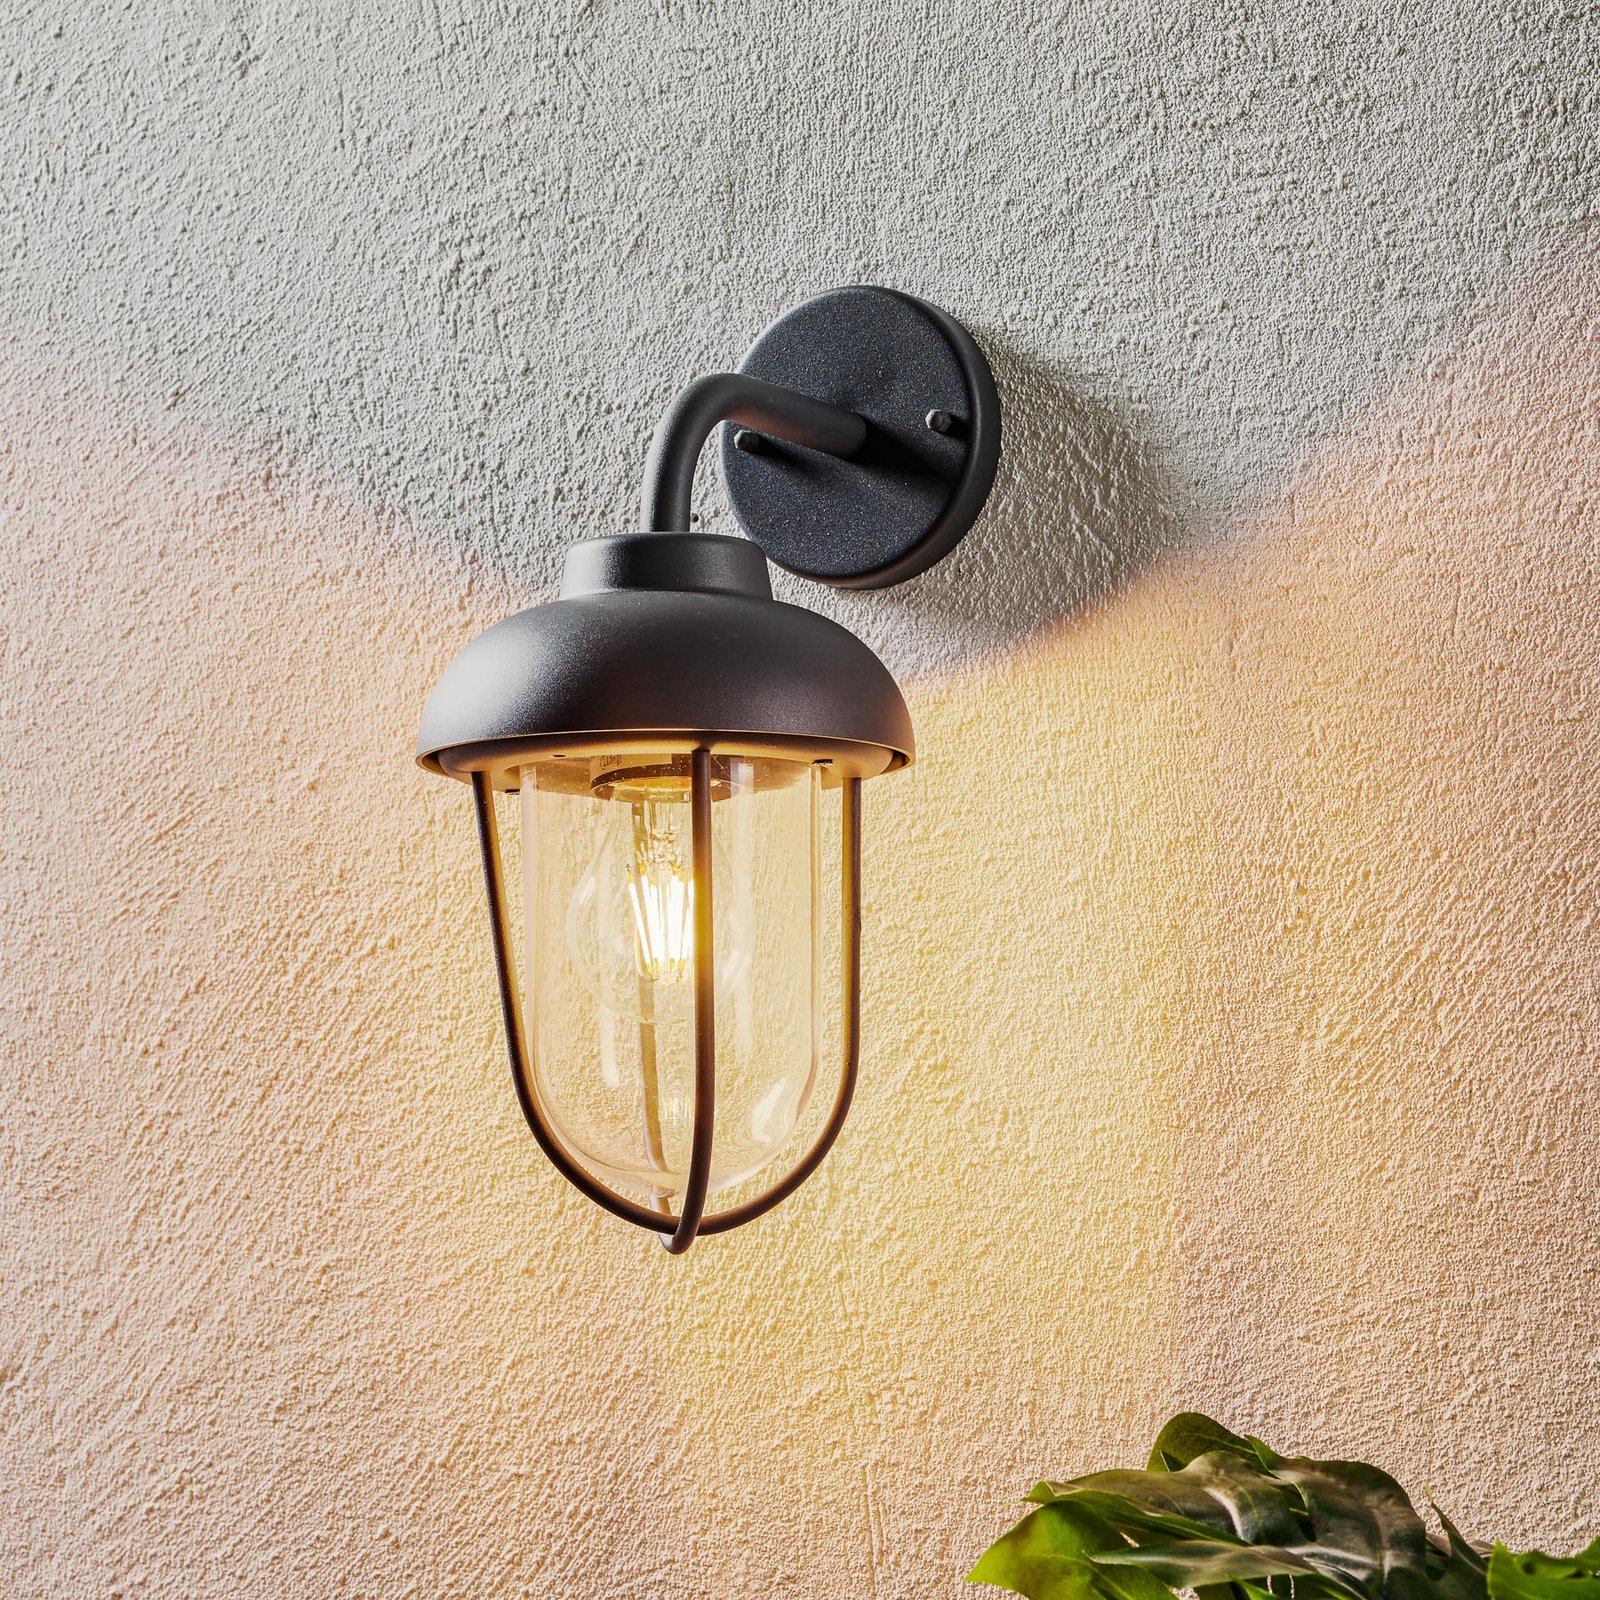 Duero outdoor wall light vintage style, anthracite